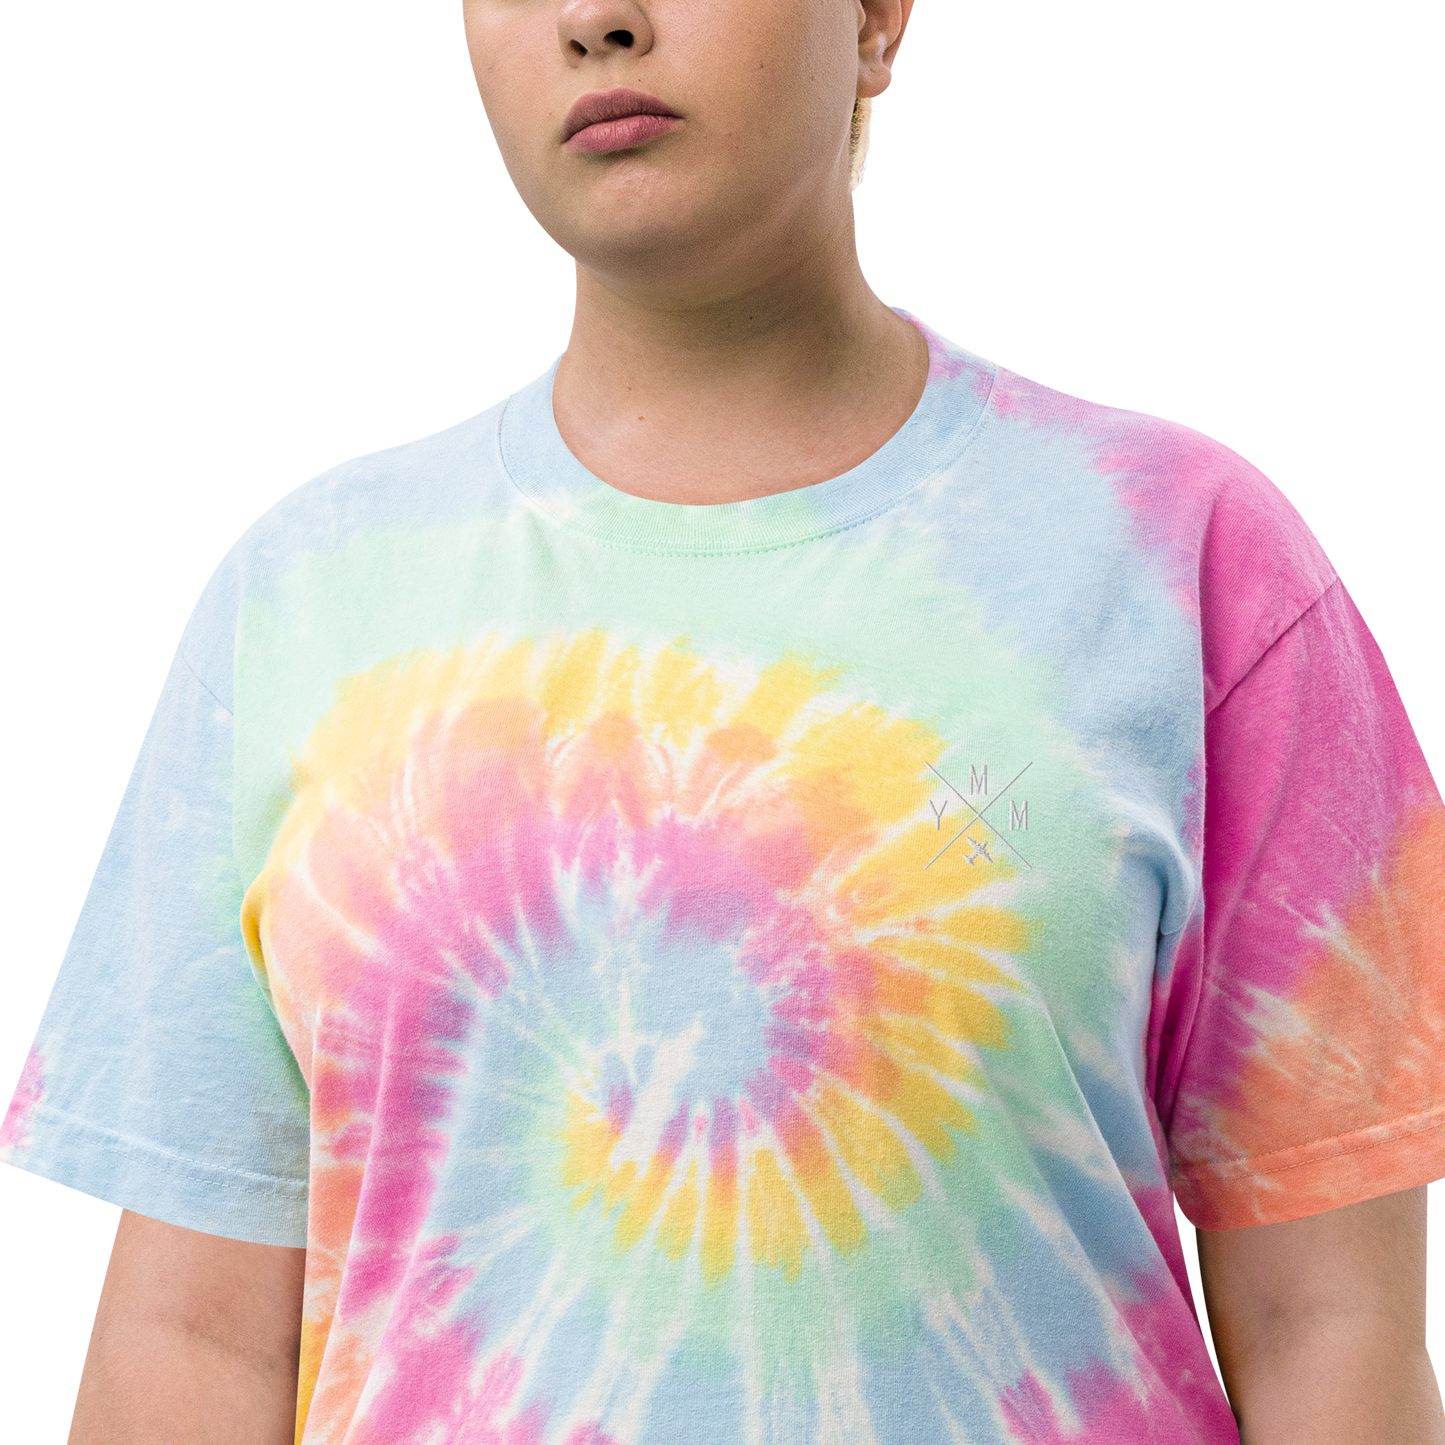 Crossed-X Oversized Tie-Dye T-Shirt • YMM Fort McMurray • YHM Designs - Image 13